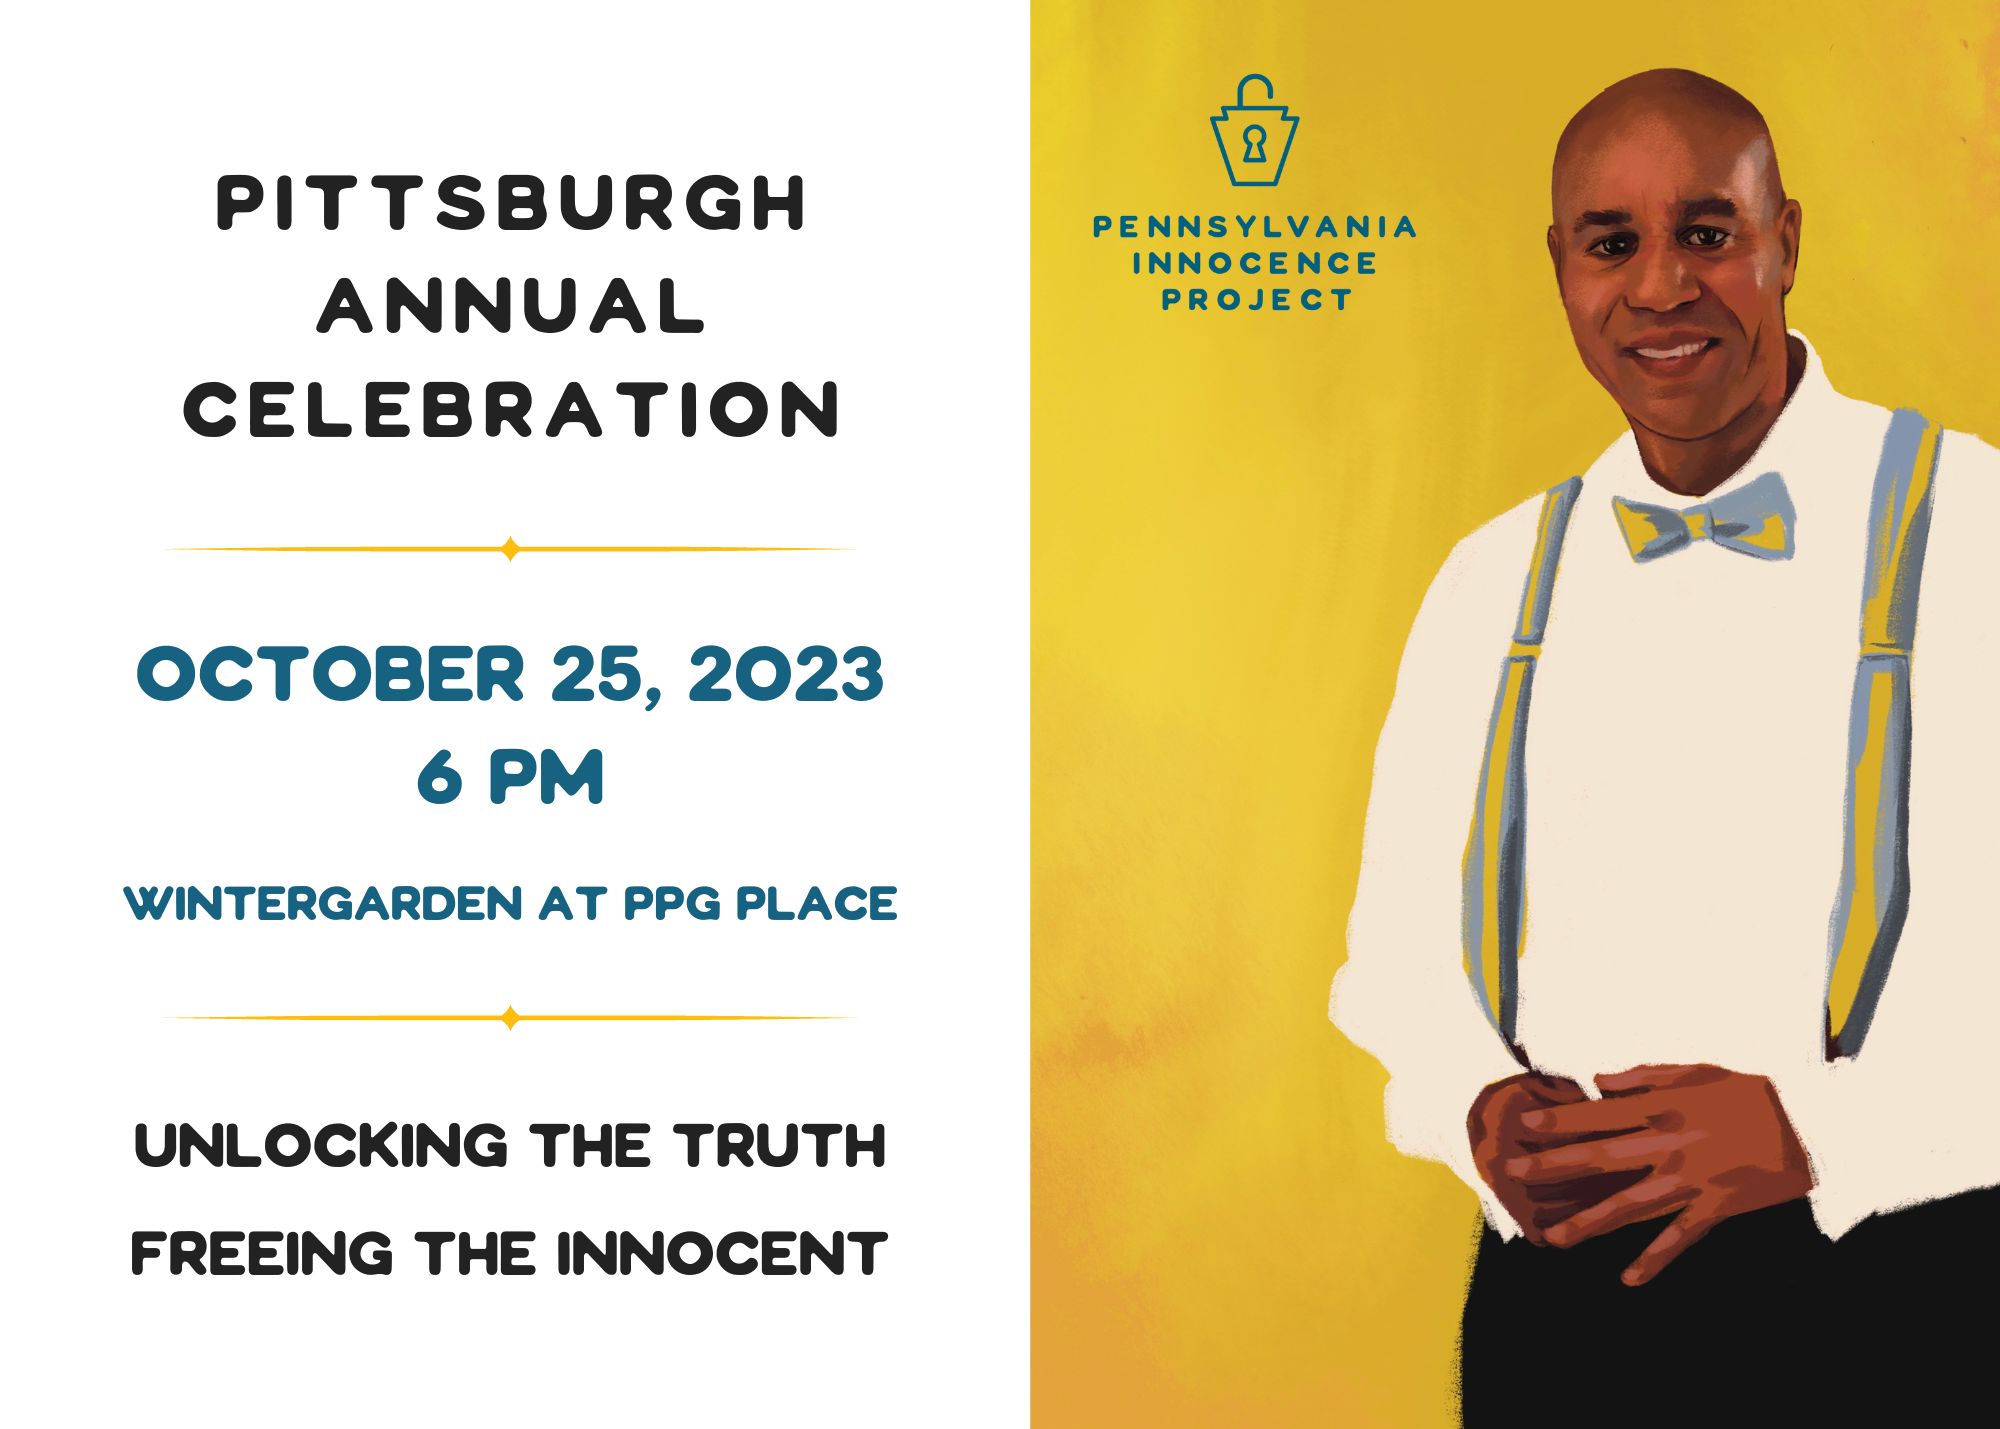 Pittsburgh Celebration on October 25th